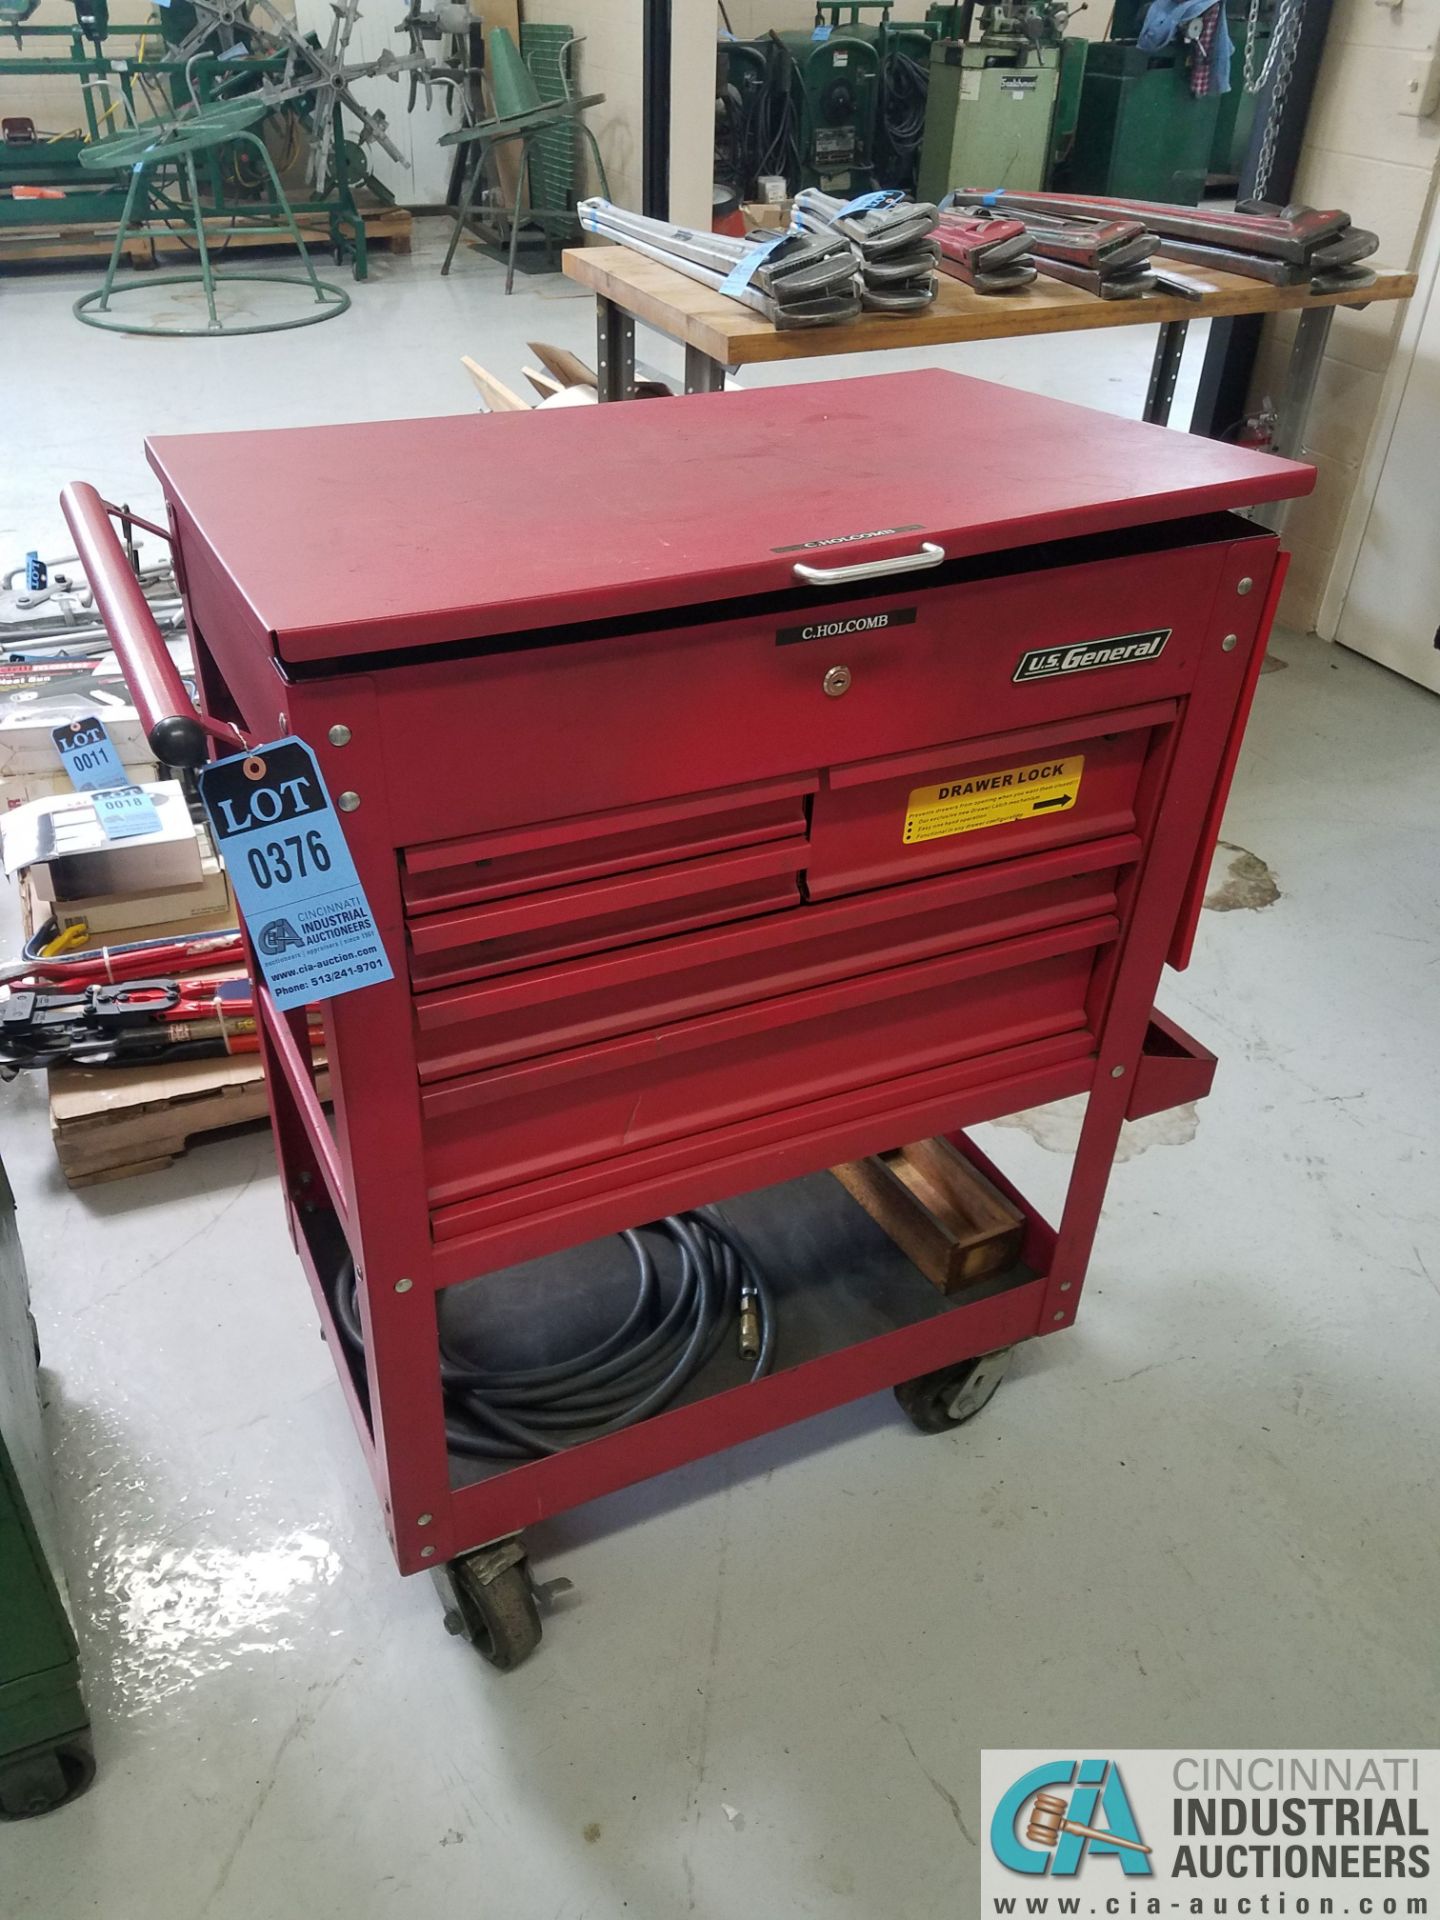 6-DRAWER US GENERAL PORTABLE TOOLBOX WITH CONTENTS; COMBO WRENCHES, SOCKETS, TRANSFER PUNCHES,